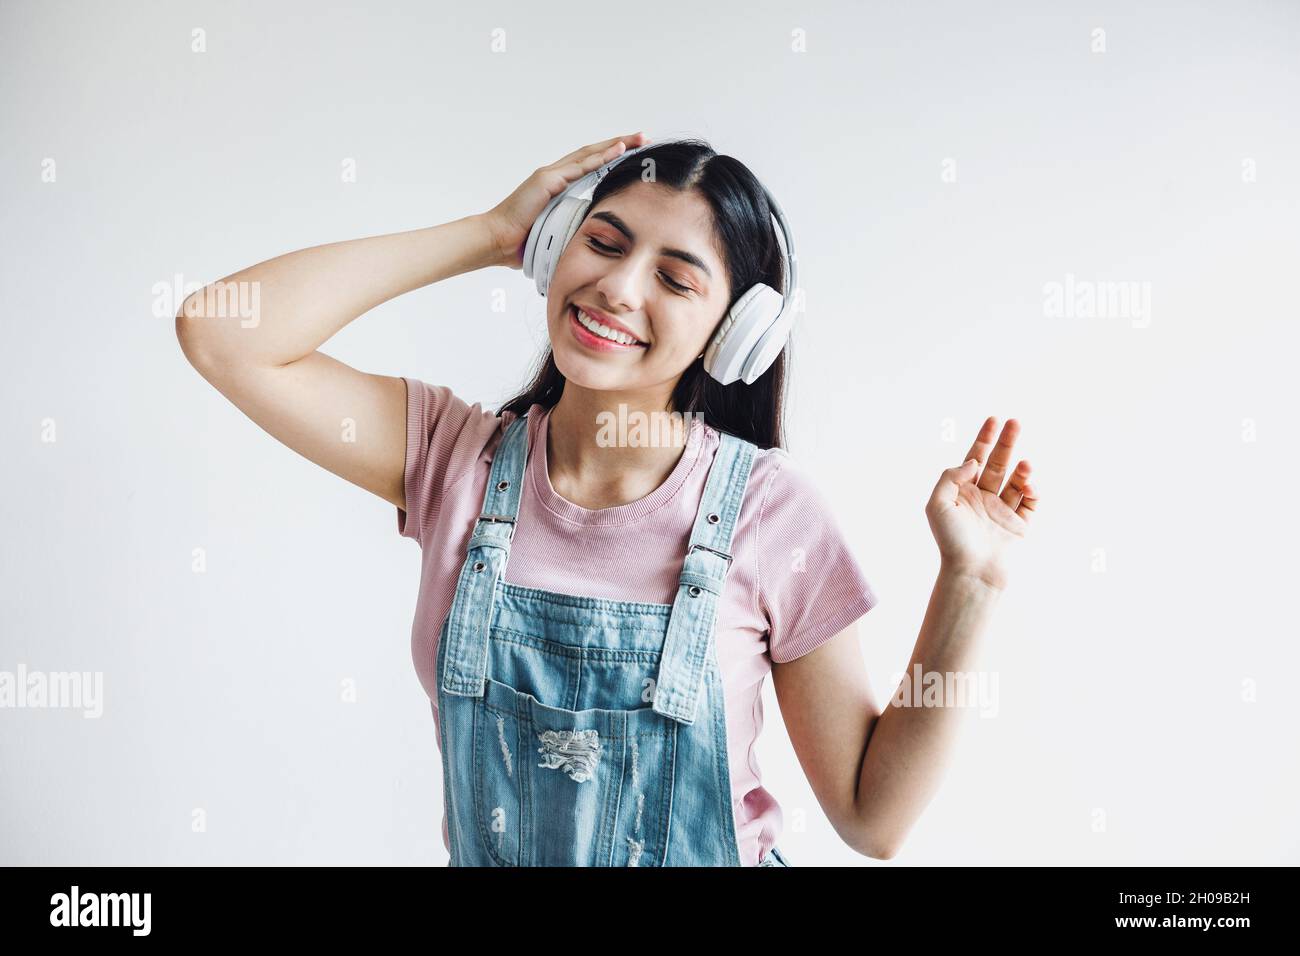 portrait of latin young smiling woman with headphones, dancing and listening music on a white background in Latin america Stock Photo